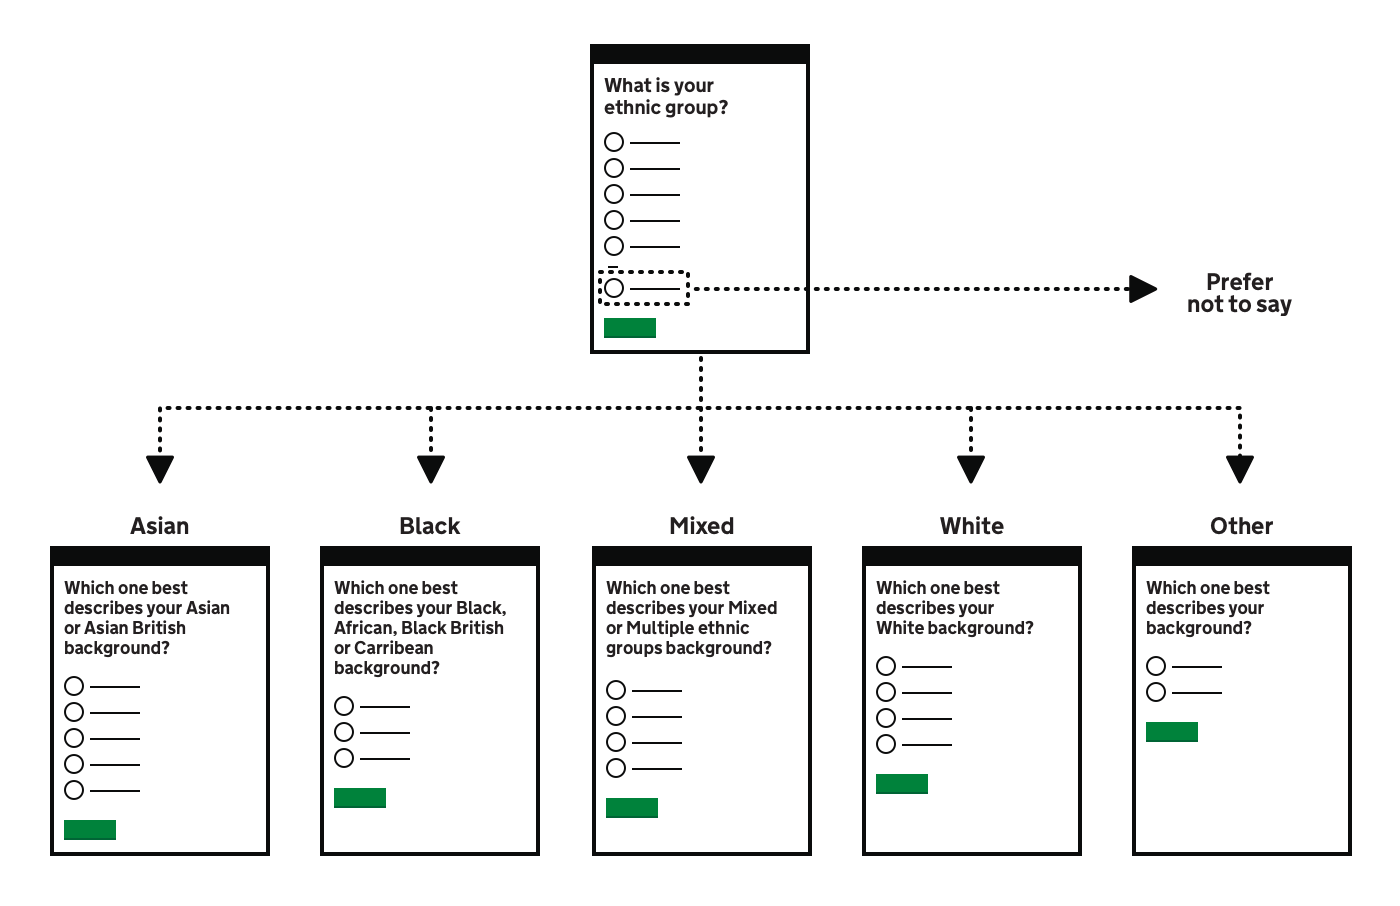 ‘Ethnic group’ flow diagram. Contains an initial page asking “What is your ethnic group?” with 6 options. 5 of the options lead to separate follow-up pages asking ”Which one best describes your background?” for Asian, Black, Mixed, White, or Other. The 6th option is “Prefer not to say”, which exits the flow.